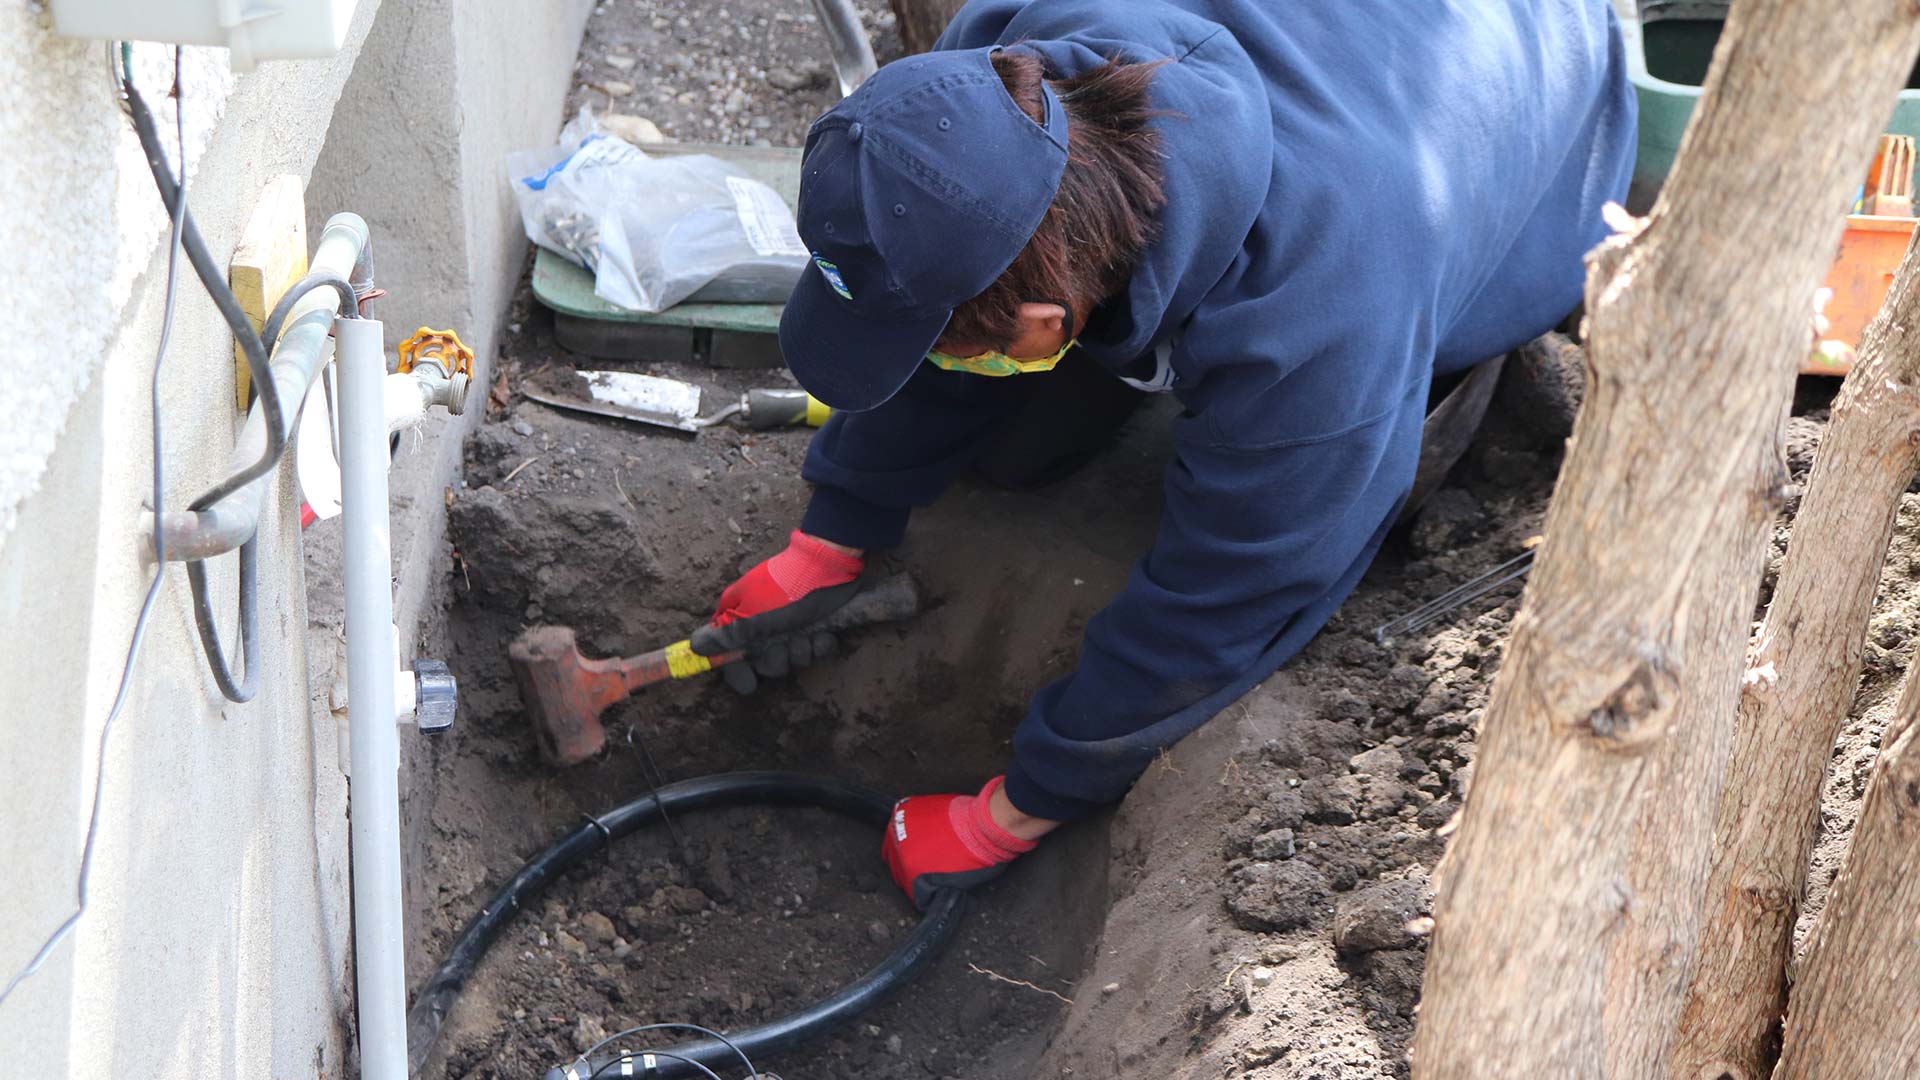 Irrigation expert repairing system by house near Southwood, Calgary, AB.